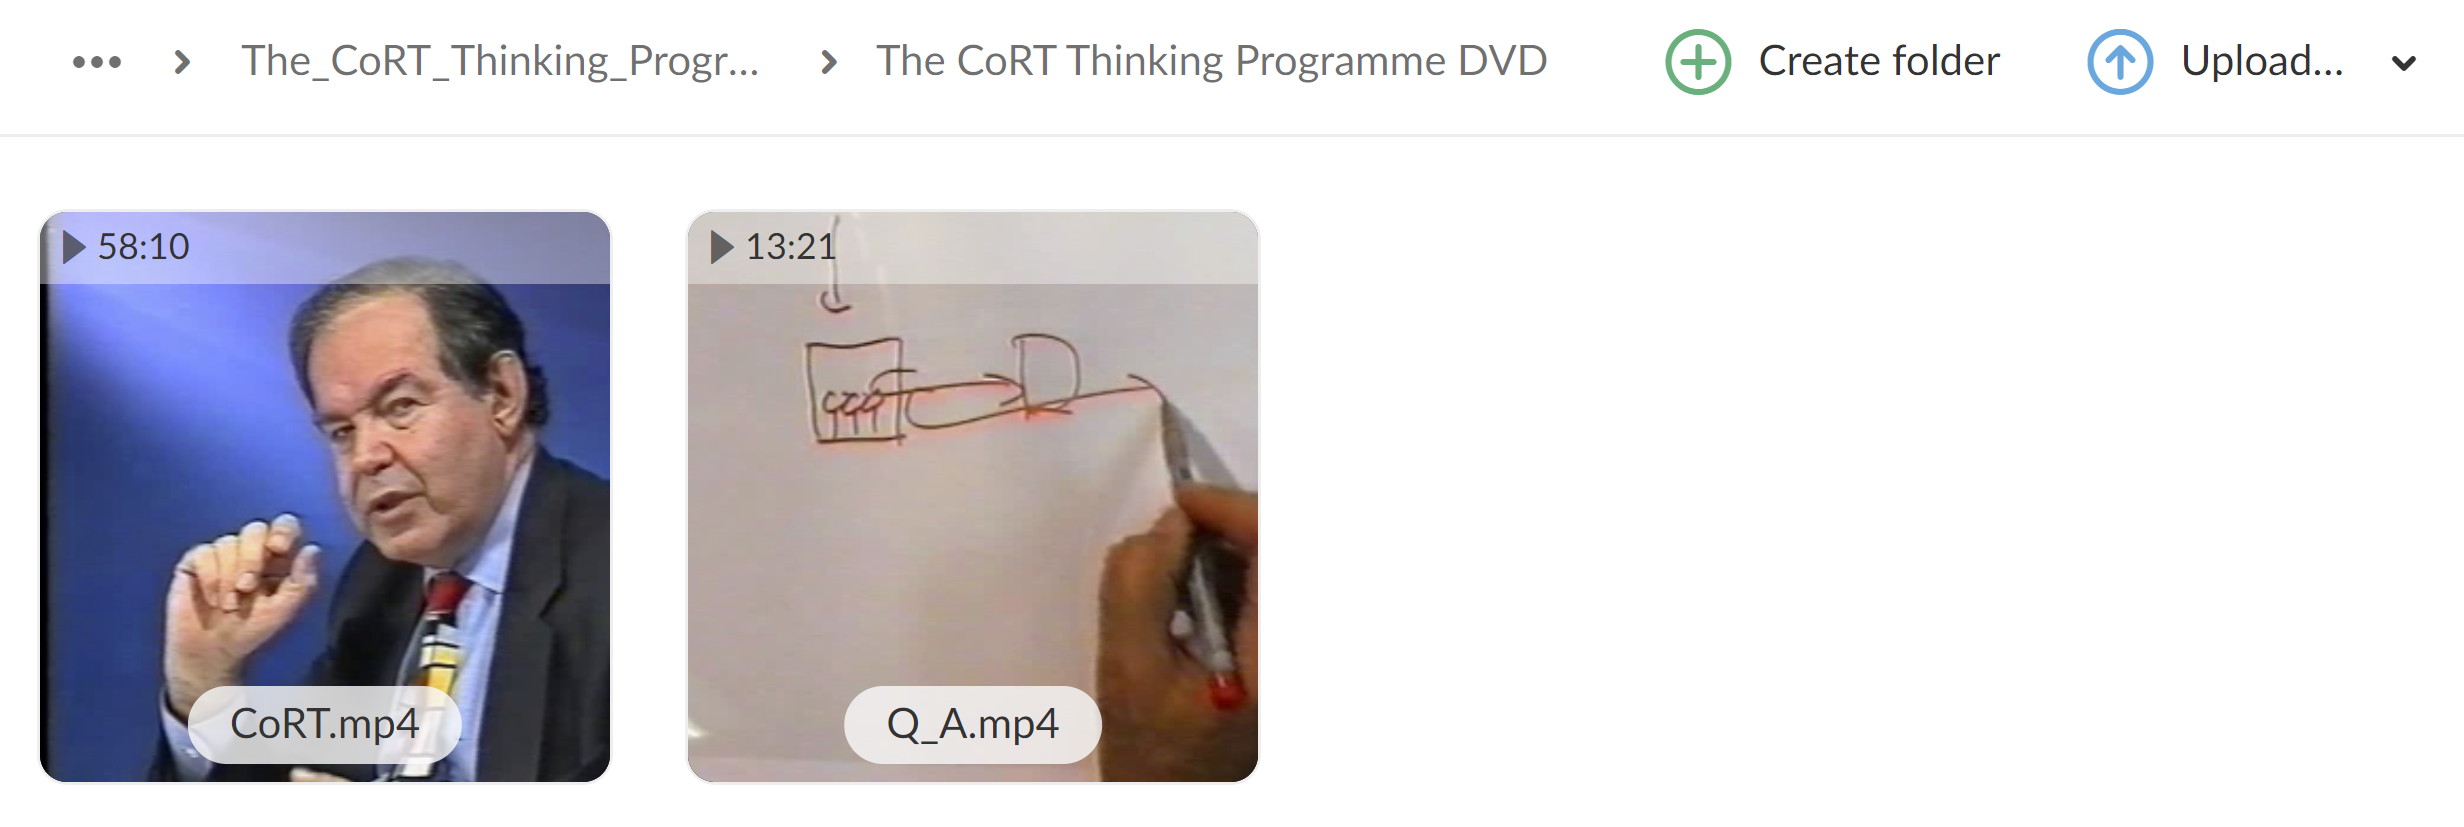 The Cort Thinking Programme